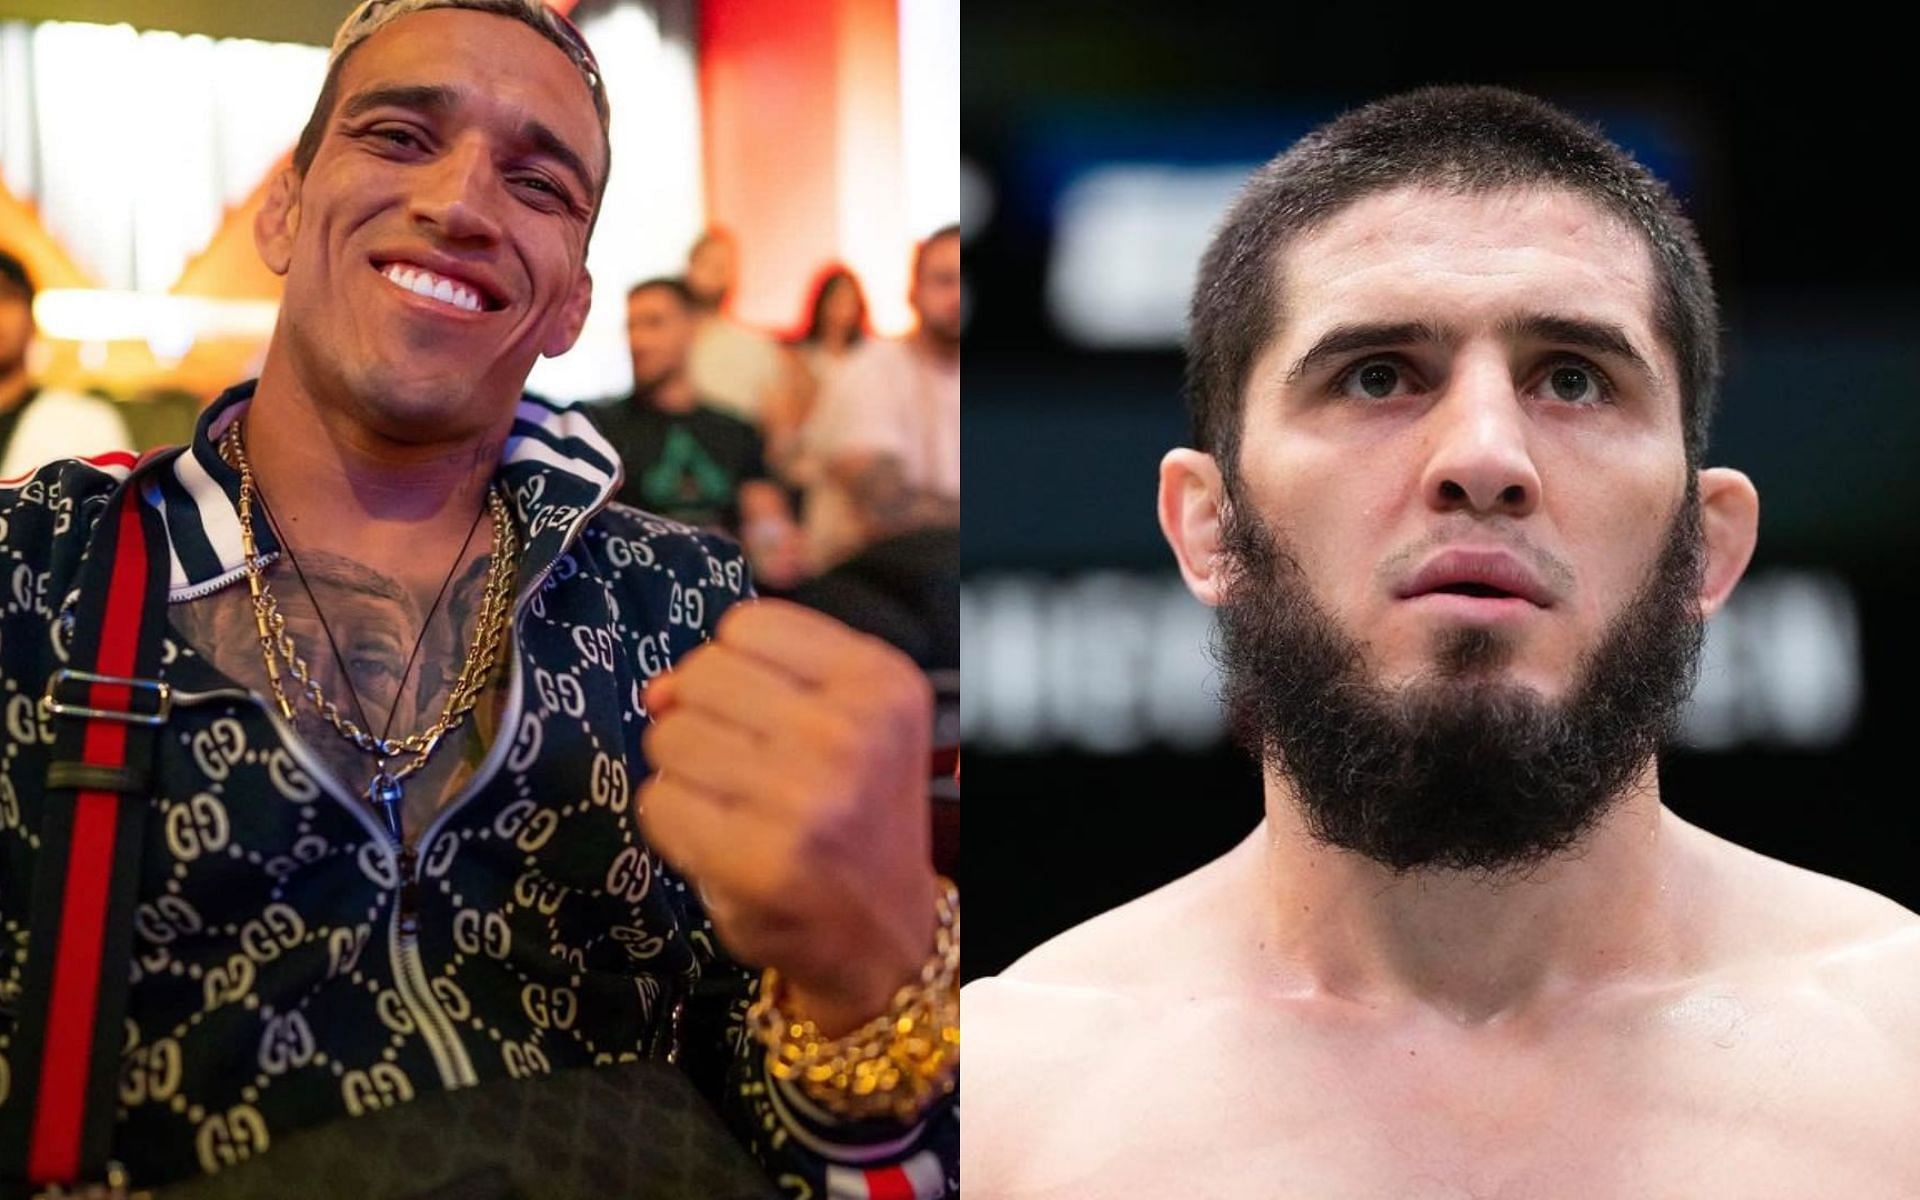 Charles Oliveira (Left) and Islam Makhachev (Right) (Images courtesy of @charlesdobronxs Instagrama and @makhachevmma Instagram)